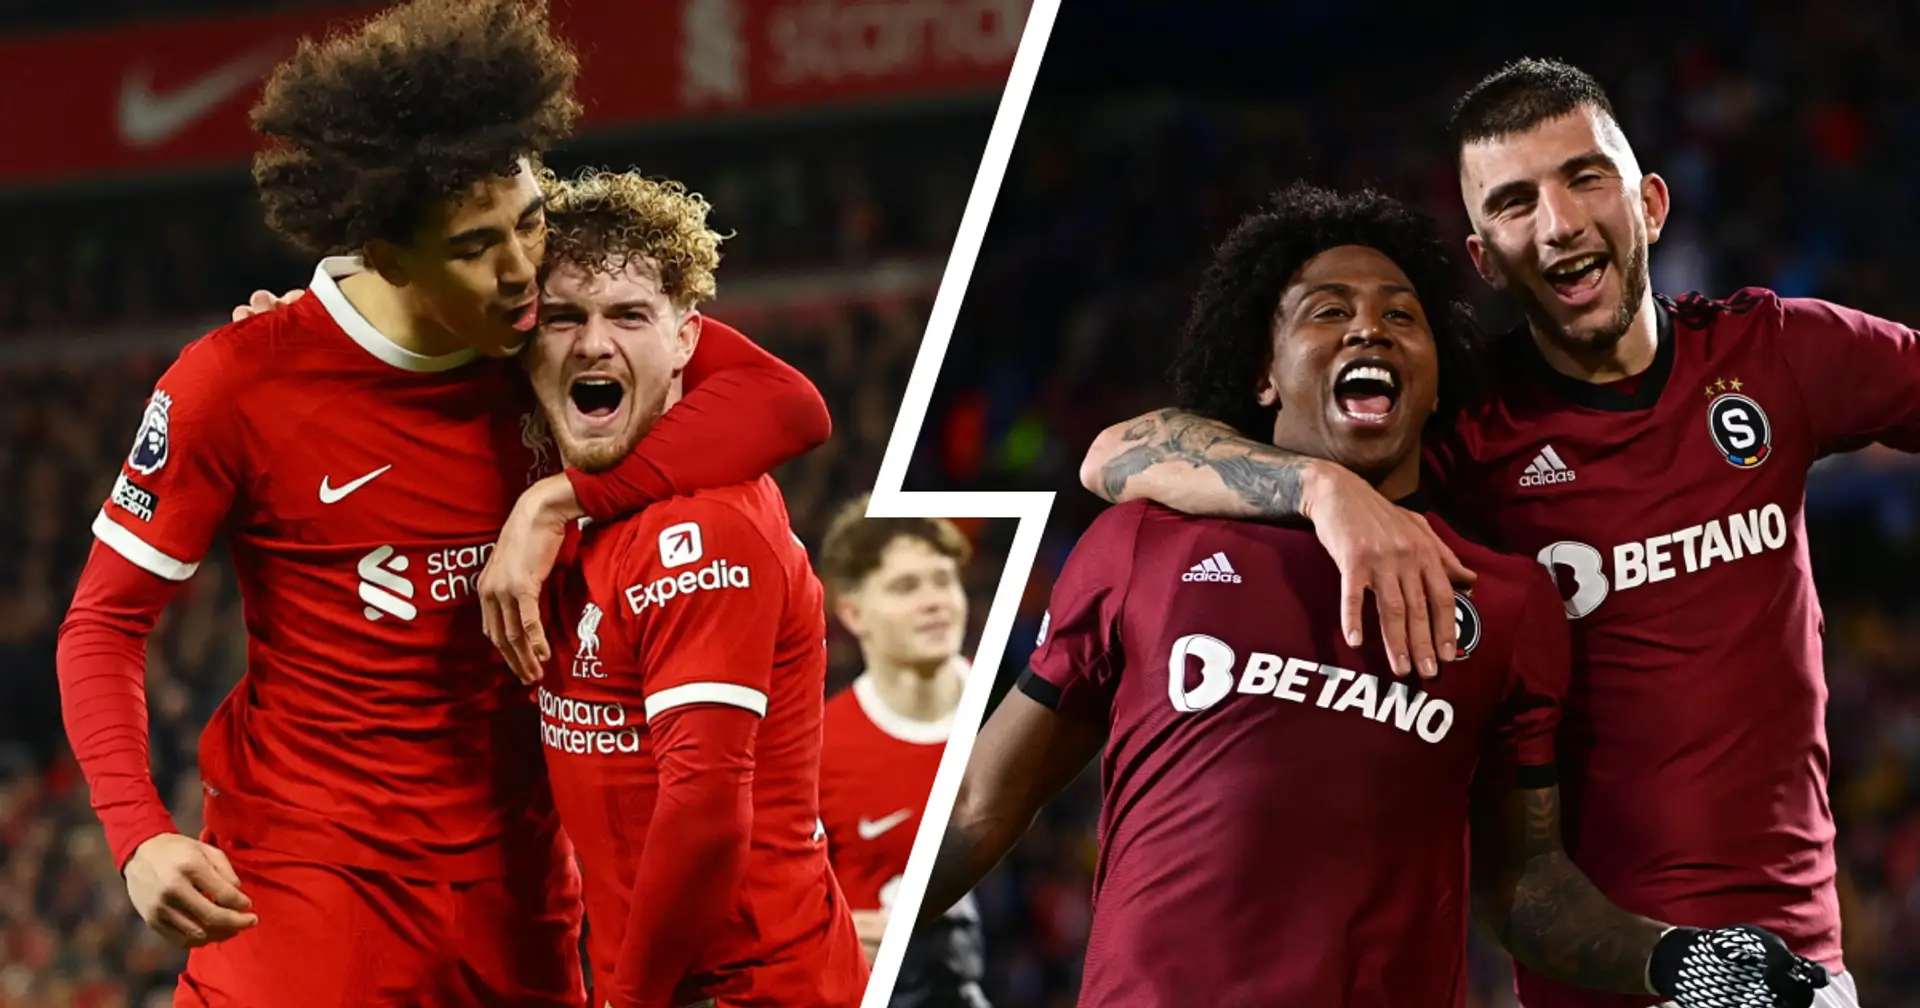 Liverpool learn Europa League opponent & 3 more big stories you might've missed